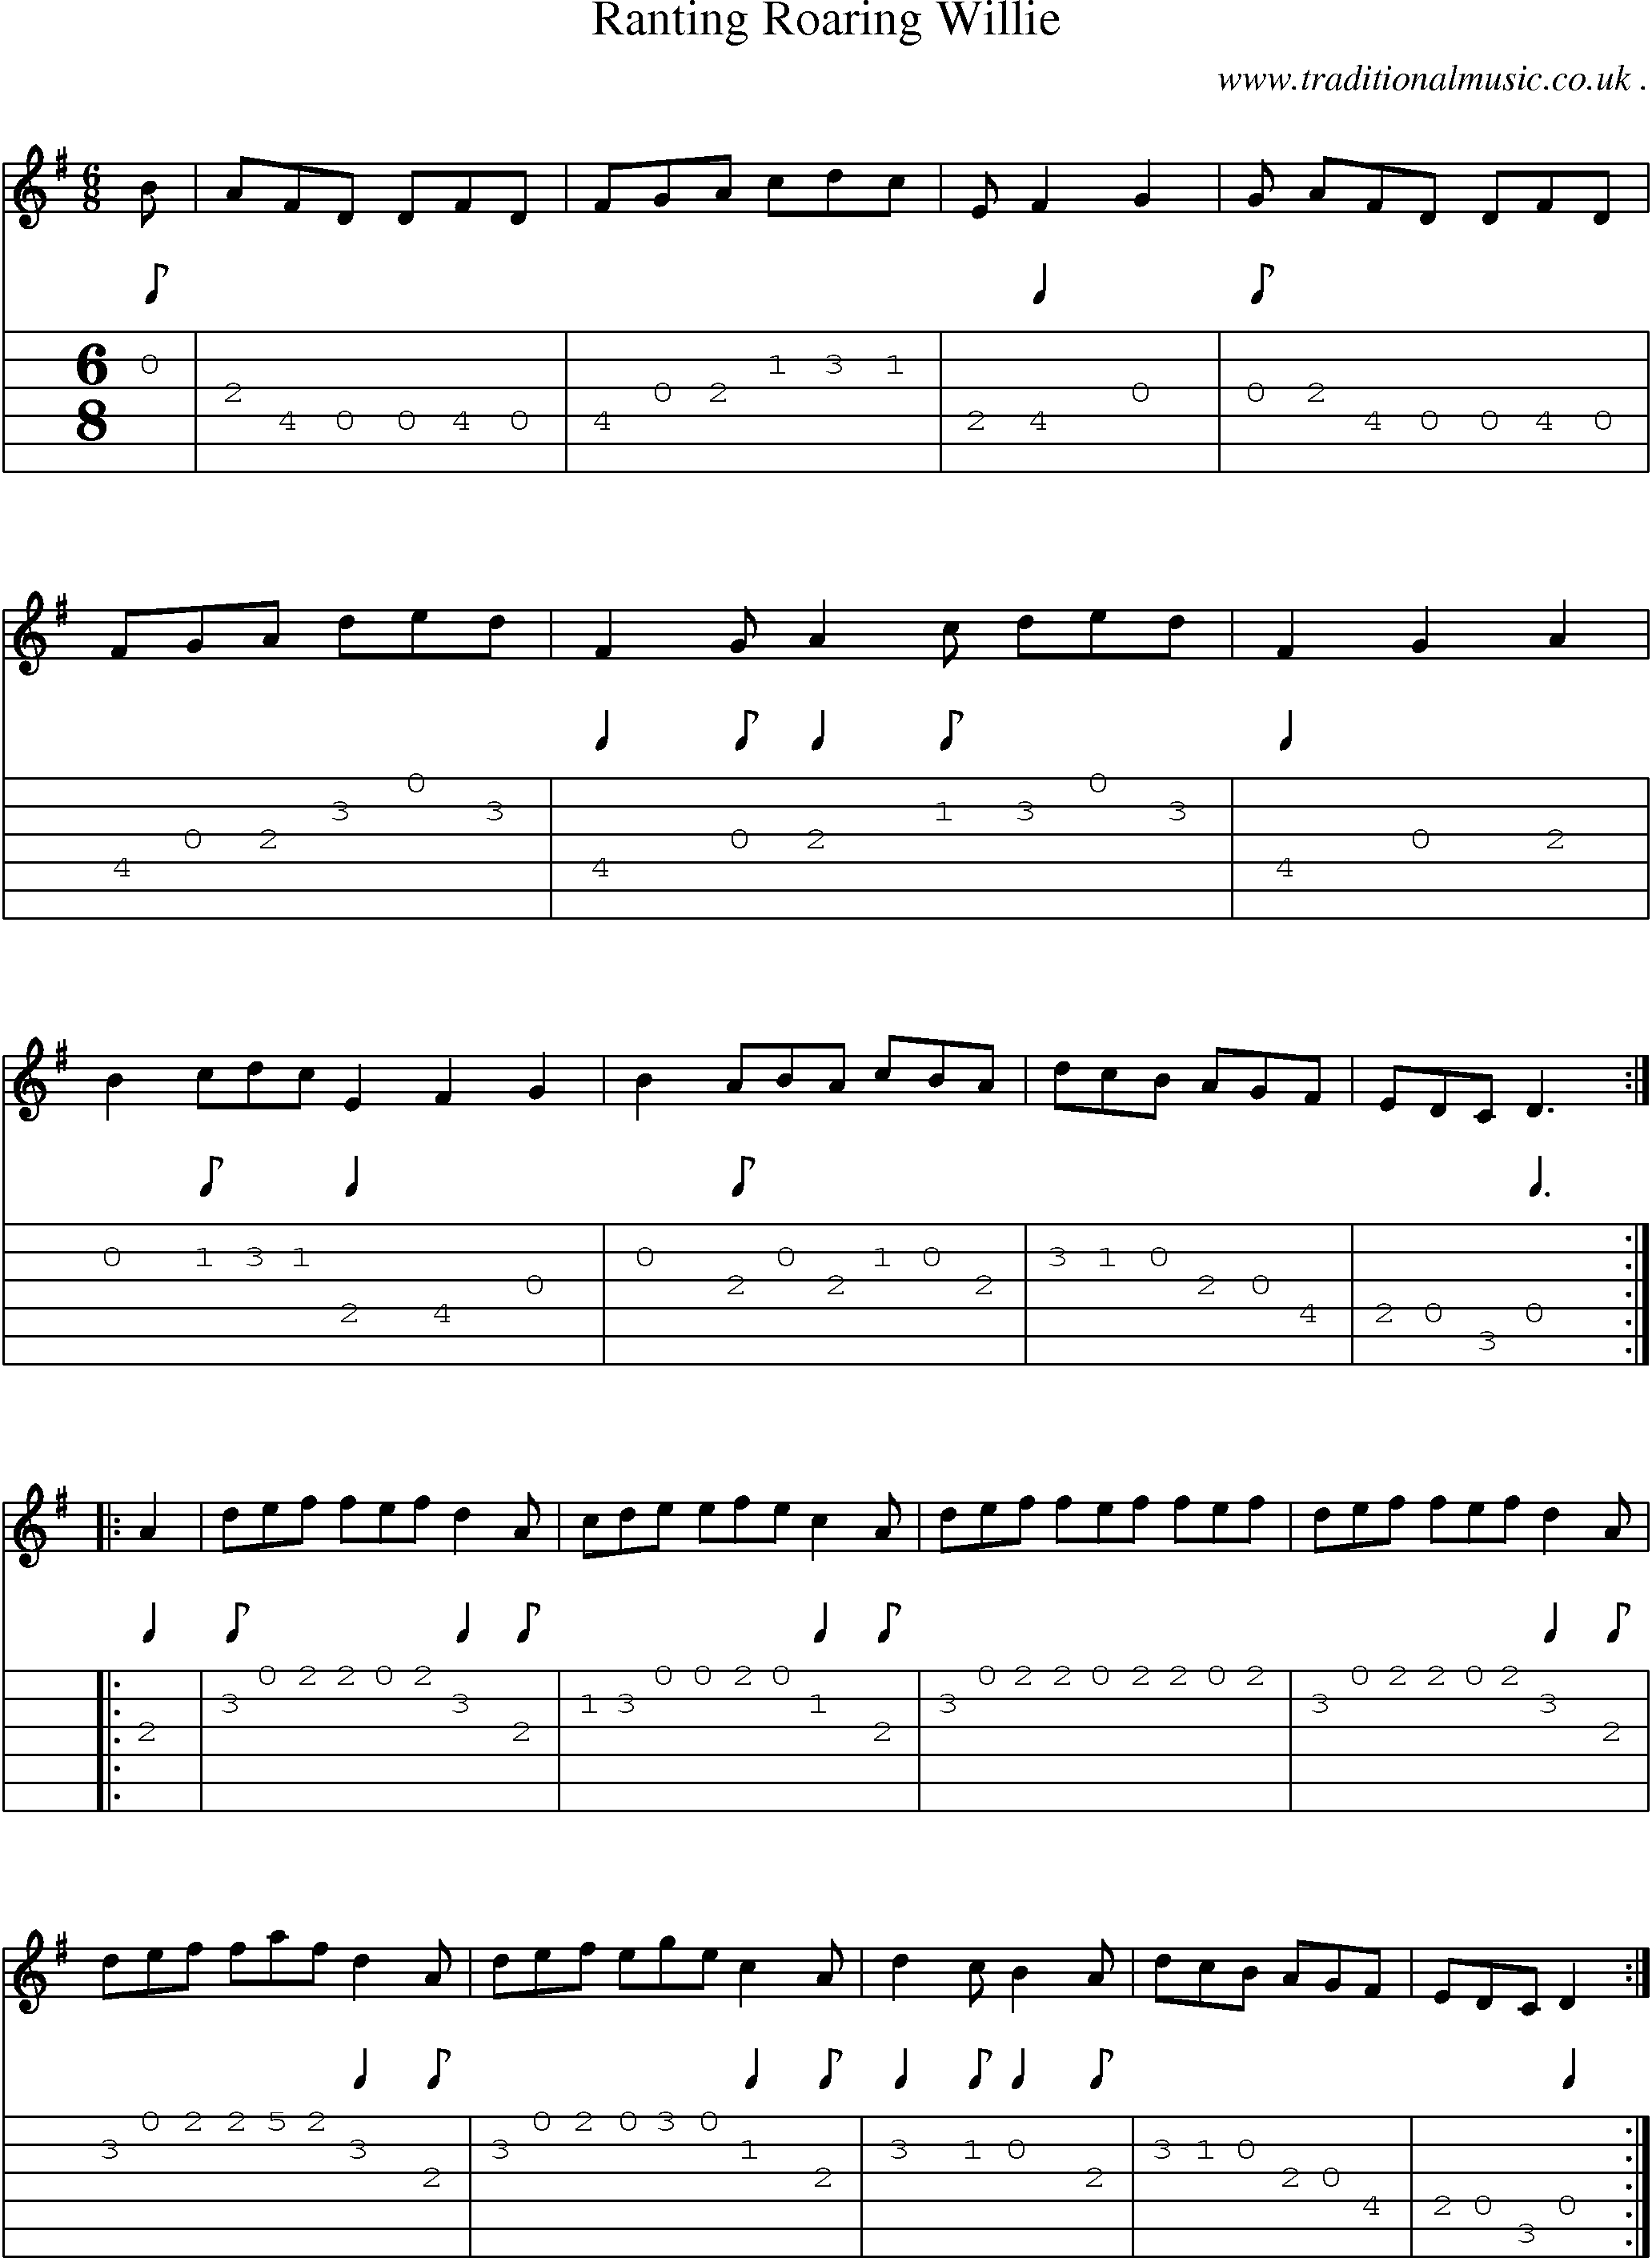 Sheet-Music and Guitar Tabs for Ranting Roaring Willie